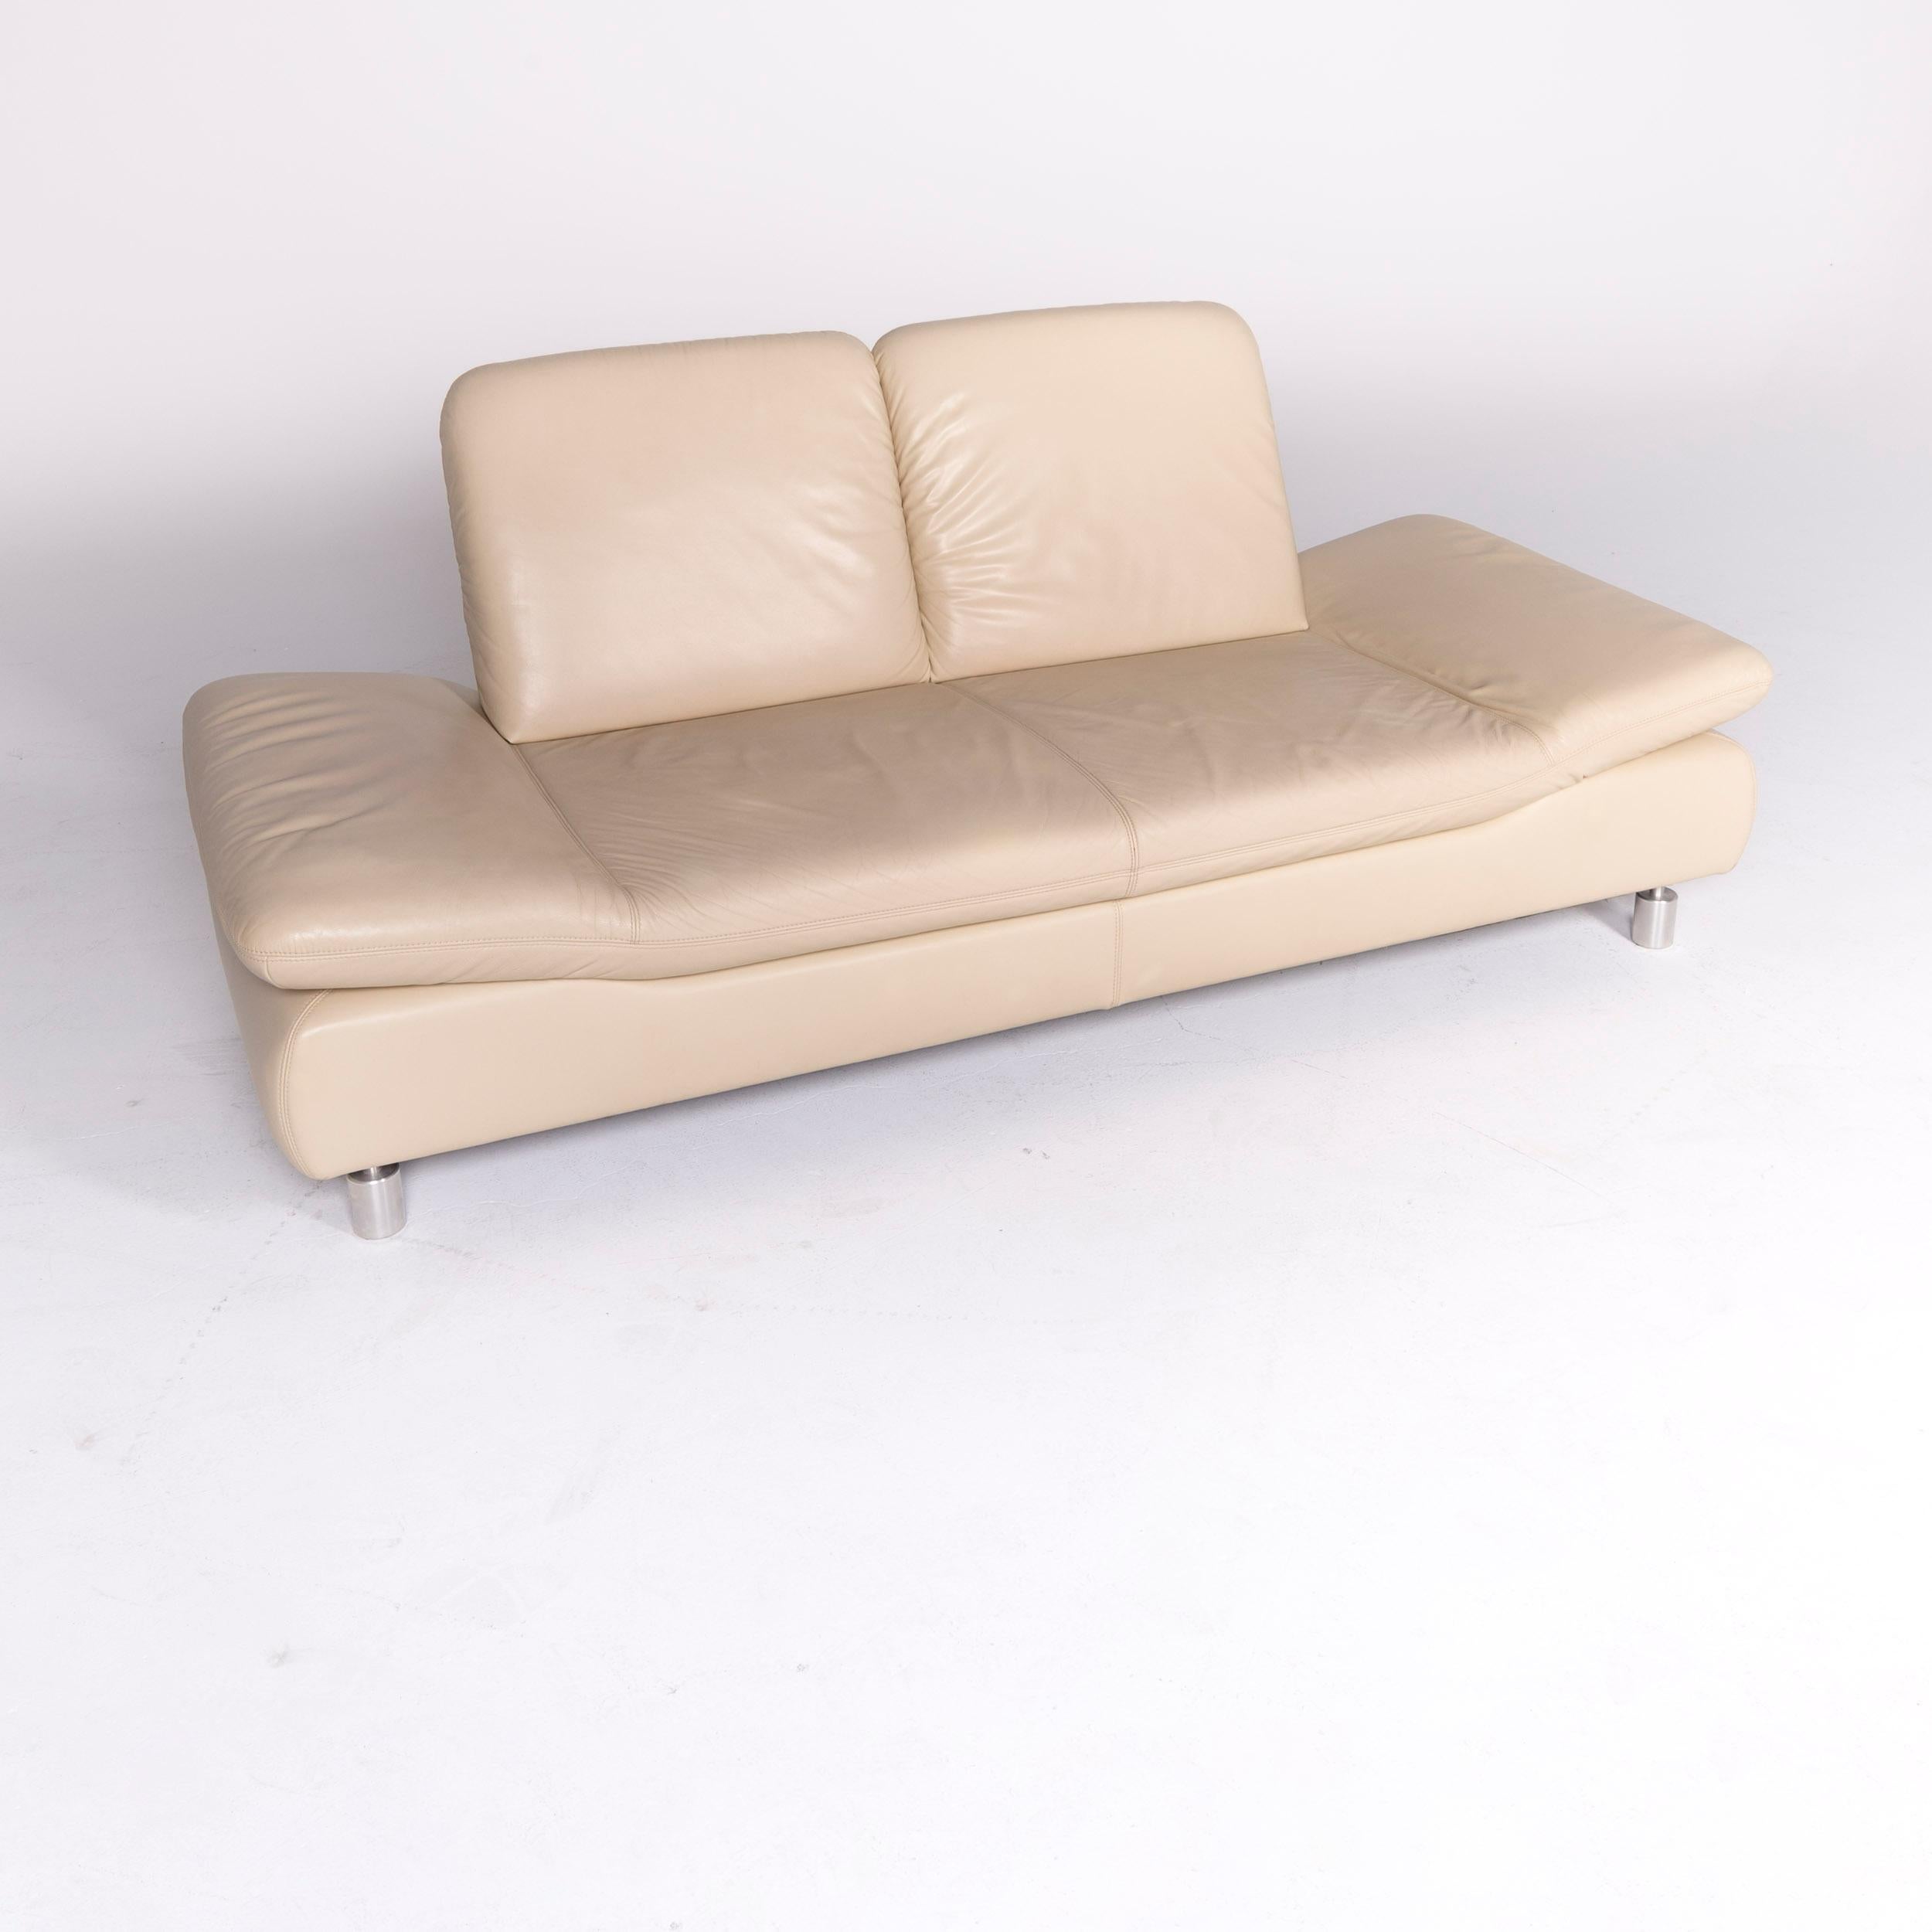 We bring to you a Koinor Rivoli designer leather sofa beige genuine leather three-seat couch.

Product measurements in centimeters:

Depth 88
Width 208
Height 88
Seat-height 40
Rest-height 46
Seat-depth 59
Seat-width 123
Back-height